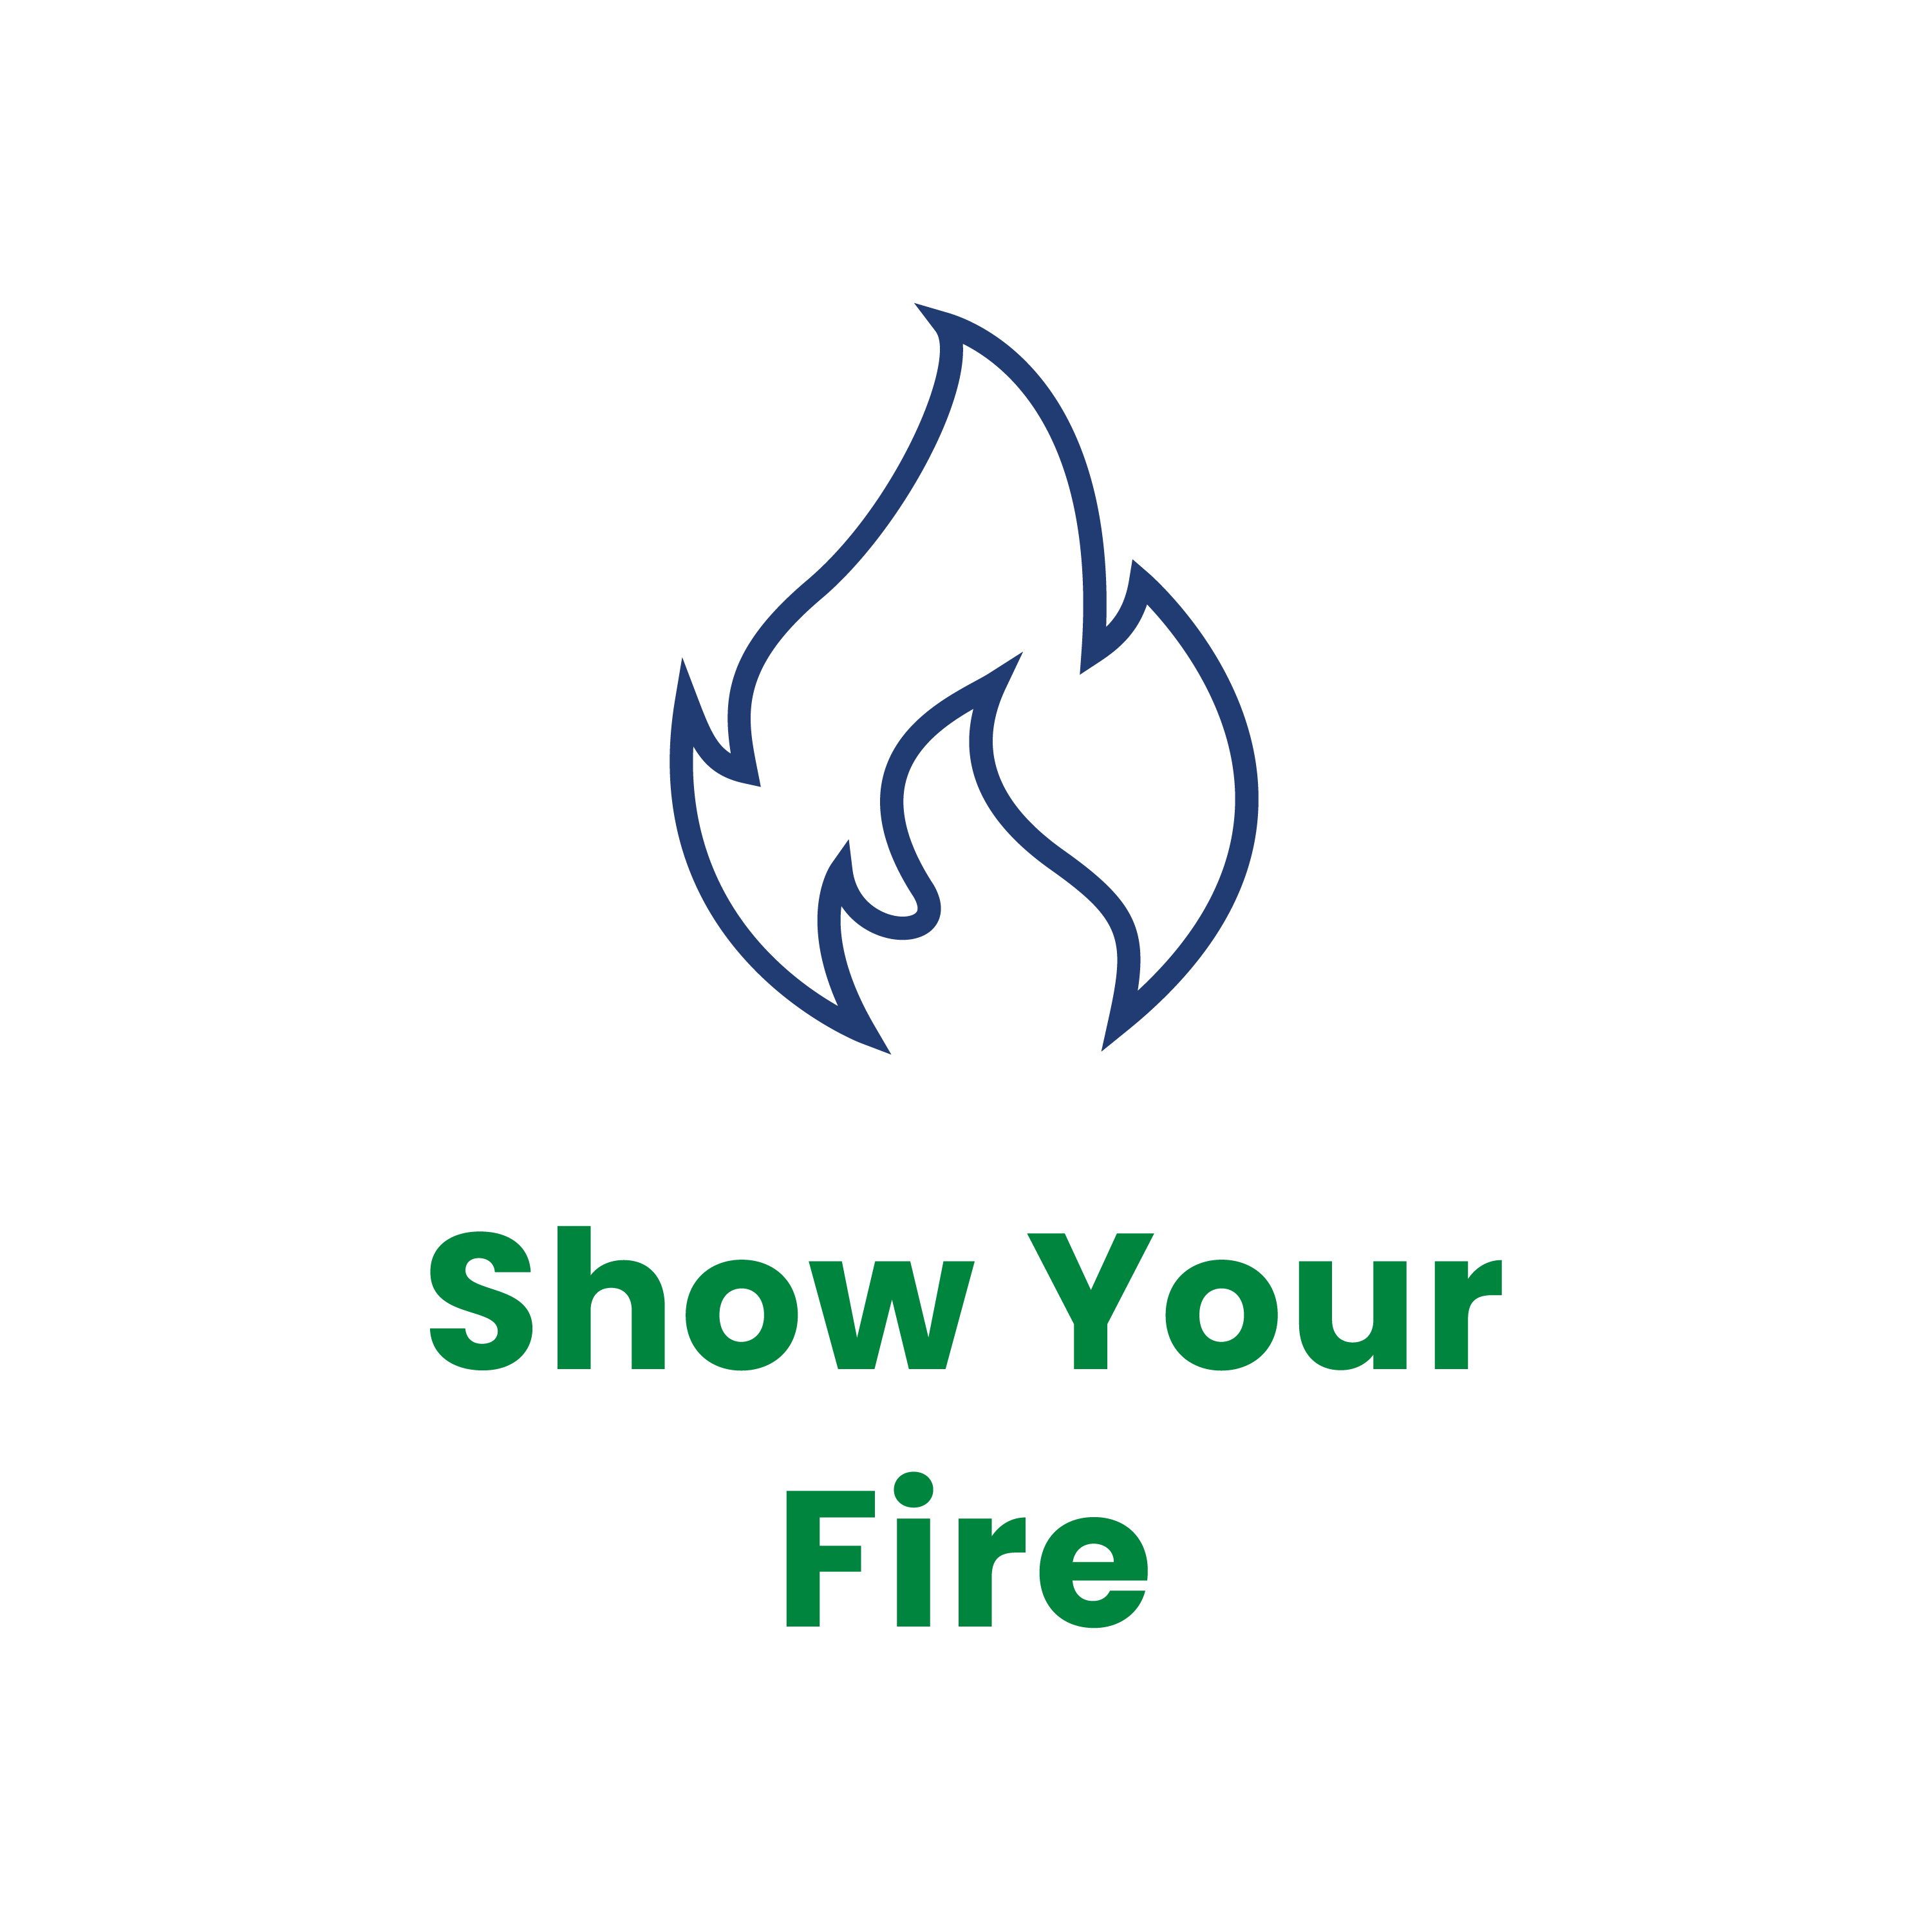 Fire that says "Show your fire"